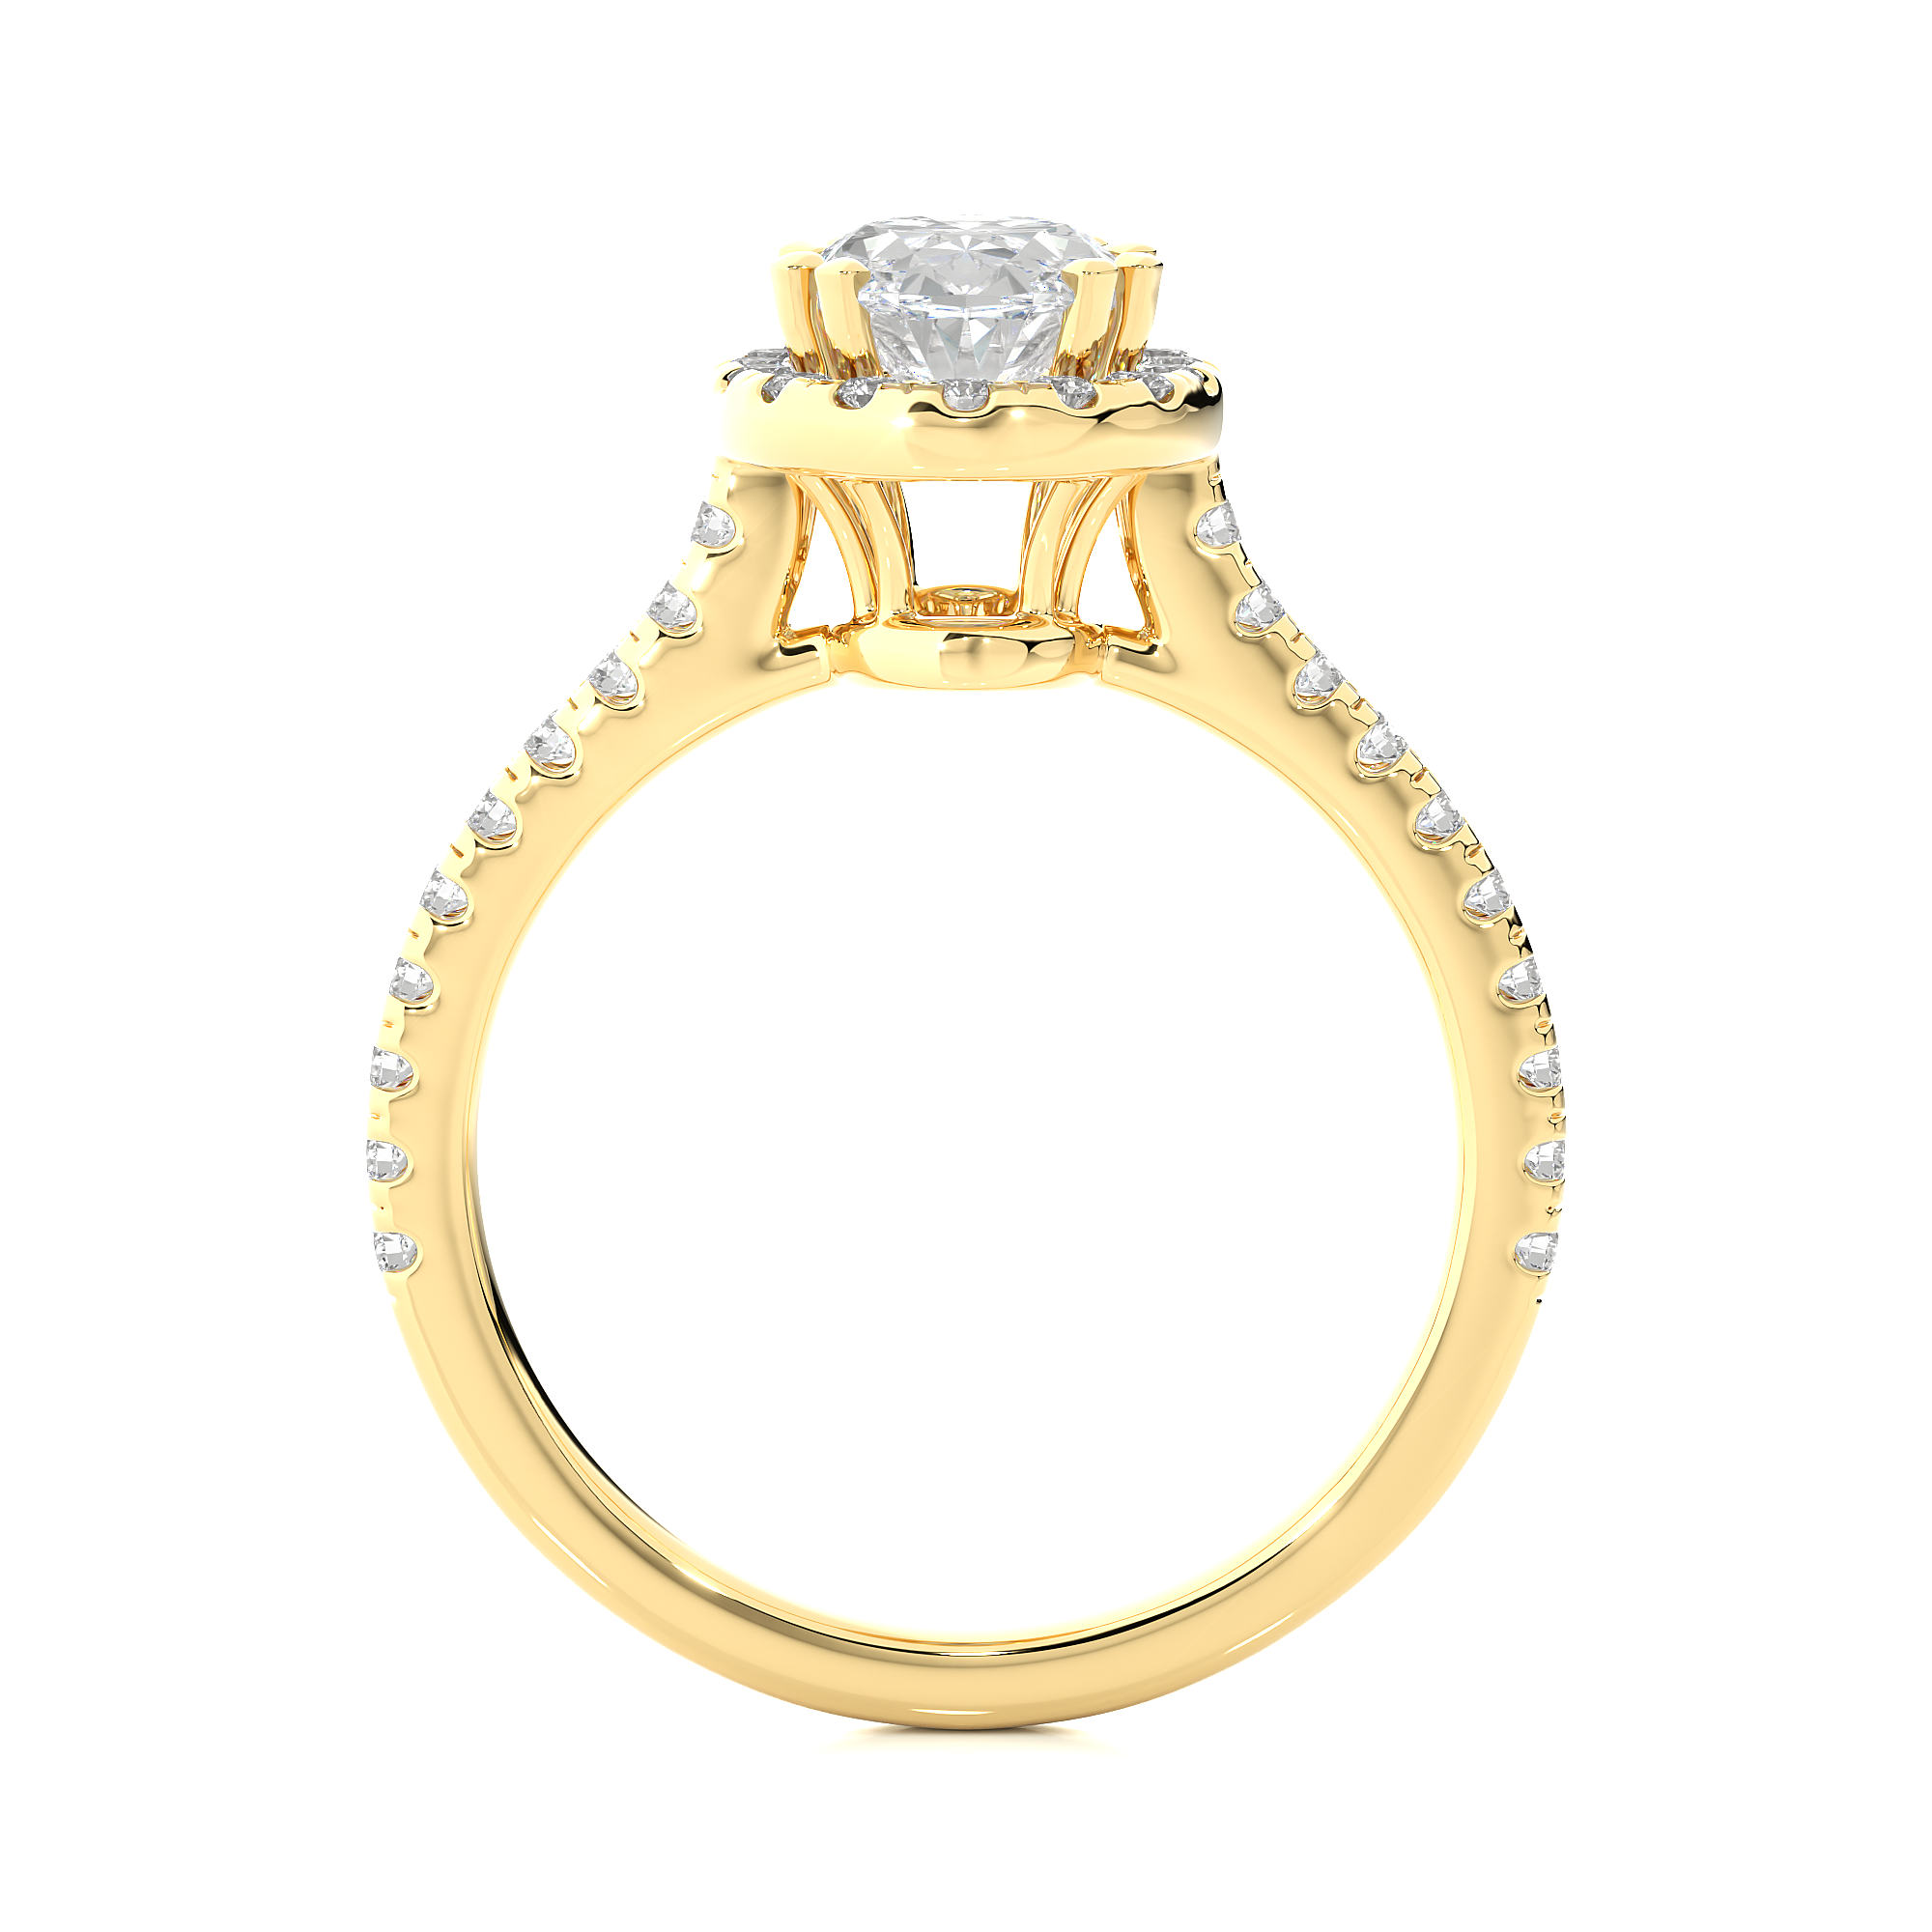 1.49Ct Oval Shaped Solitaire Diamond Ring in 14Kt Yellow Gold - Blu Diamonds